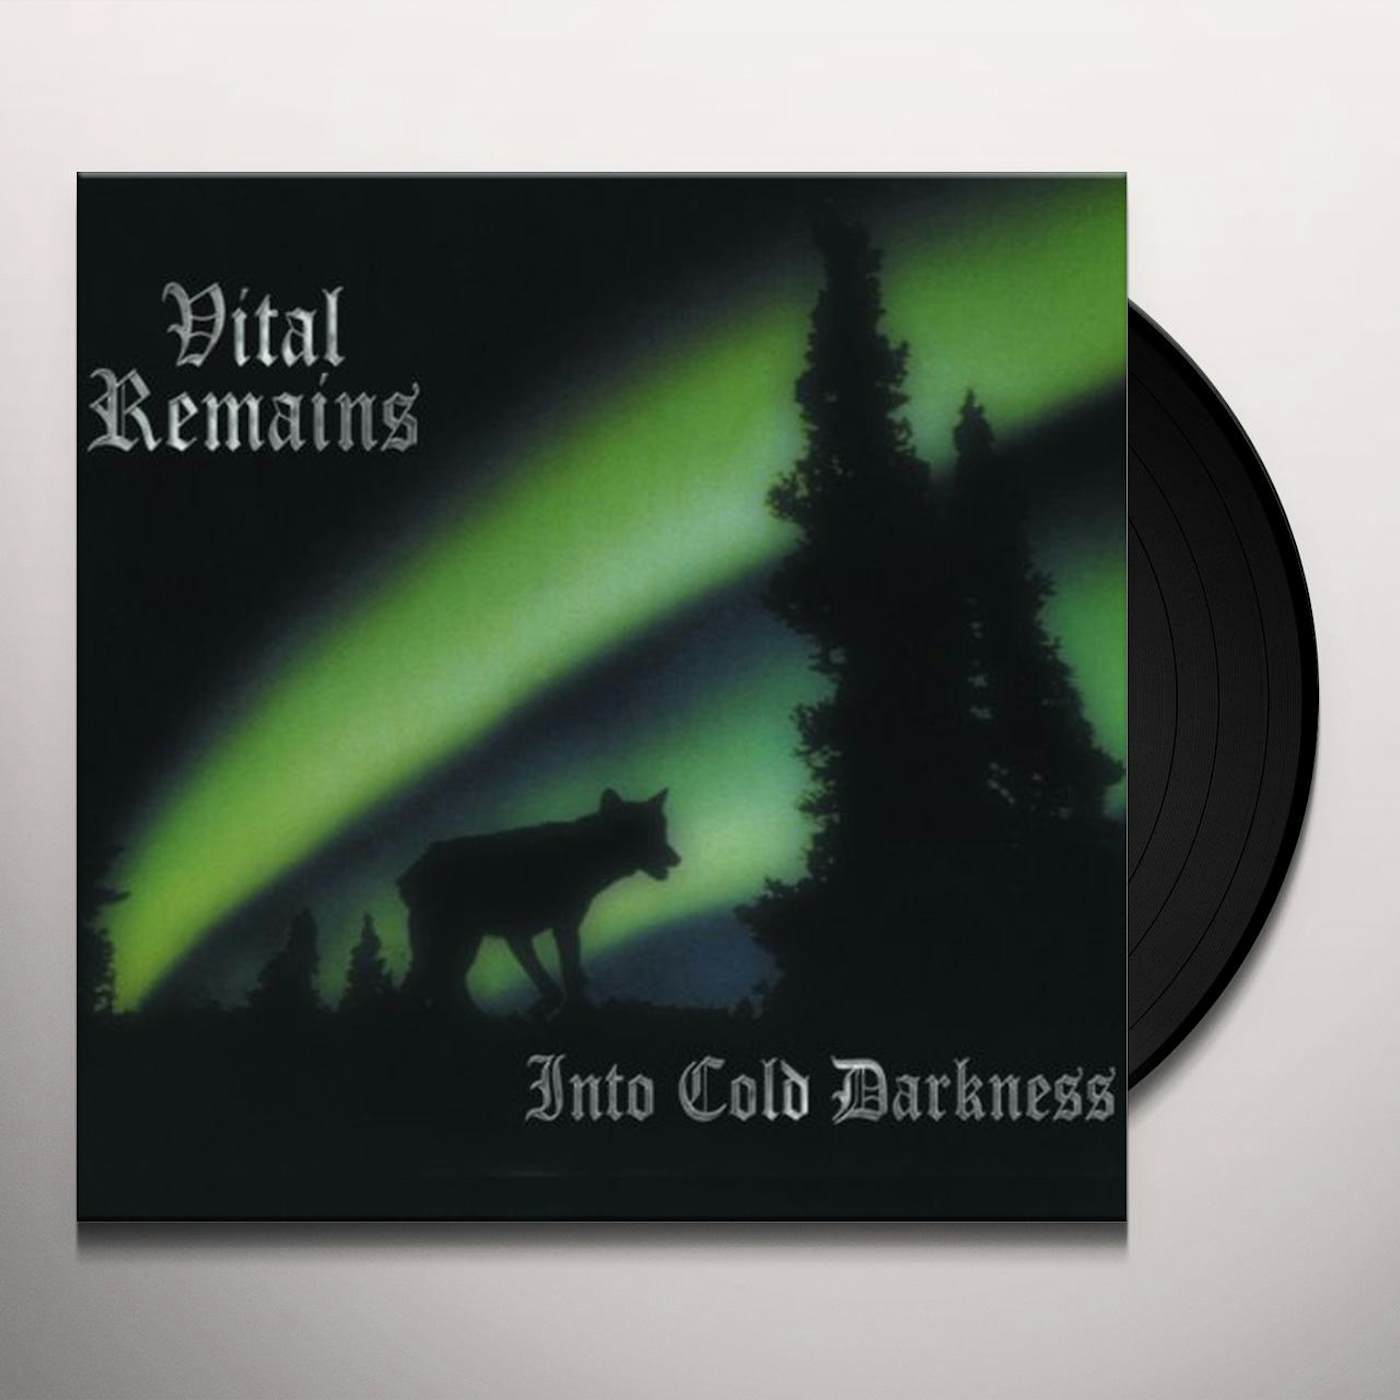 Vital Remains Into Cold Darkness Vinyl Record